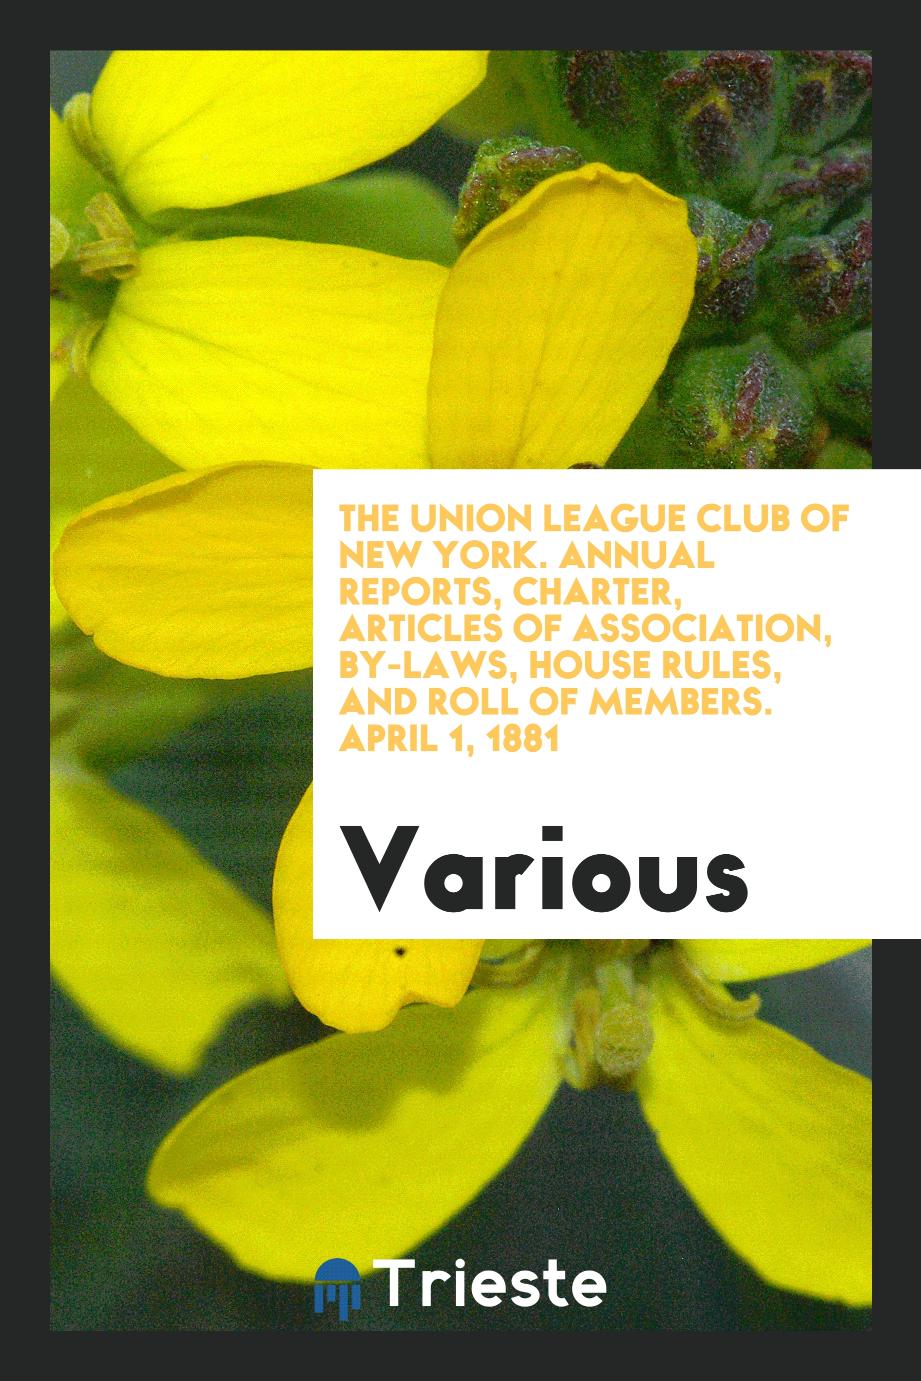 The Union League Club of New York. Annual reports, charter, articles of association, by-laws, house rules, and roll of members. April 1, 1881